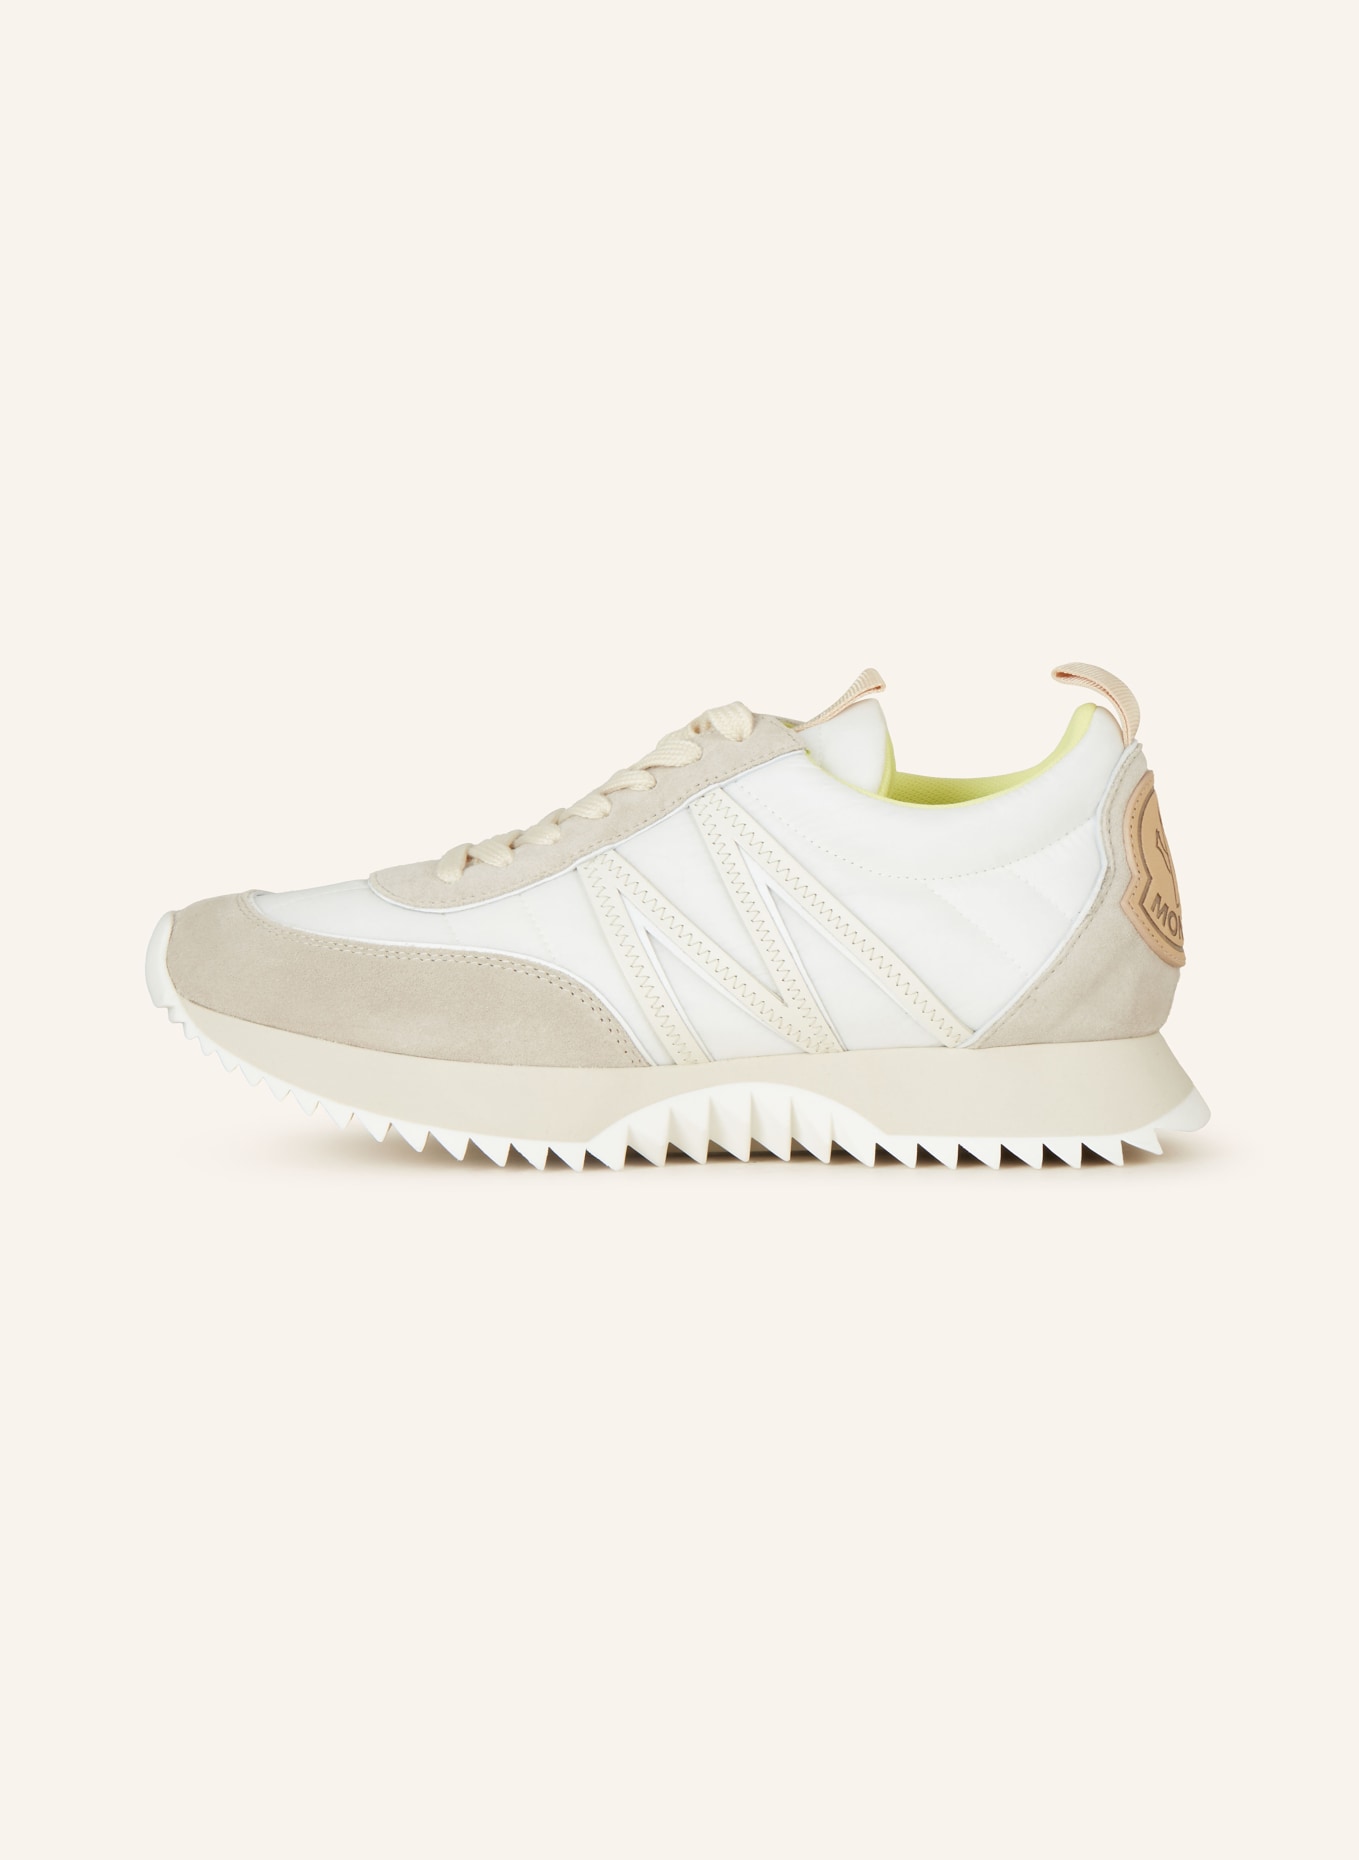 MONCLER Sneaker PACEY, Farbe: WEISS/ TAUPE/ ECRU (Bild 4)